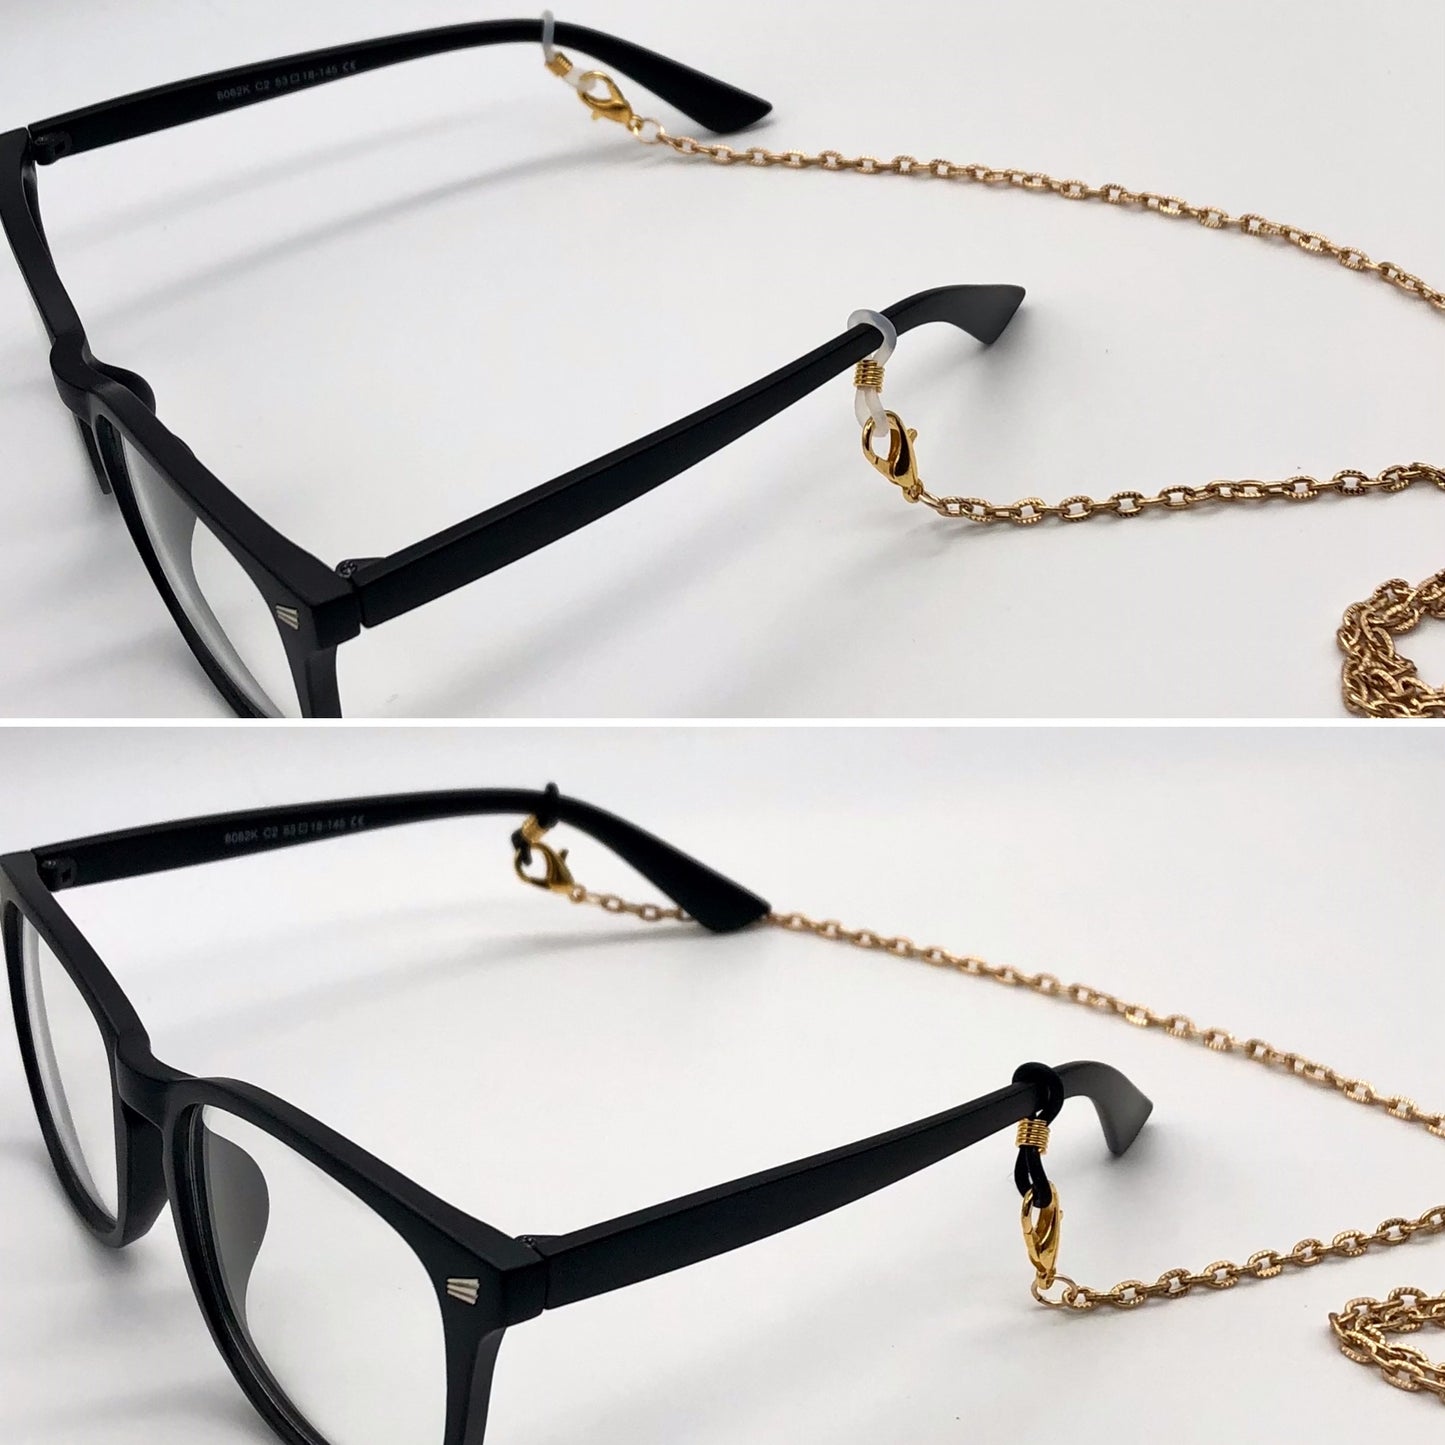 Gold face mask and eyeglass chain, lanyard, necklace